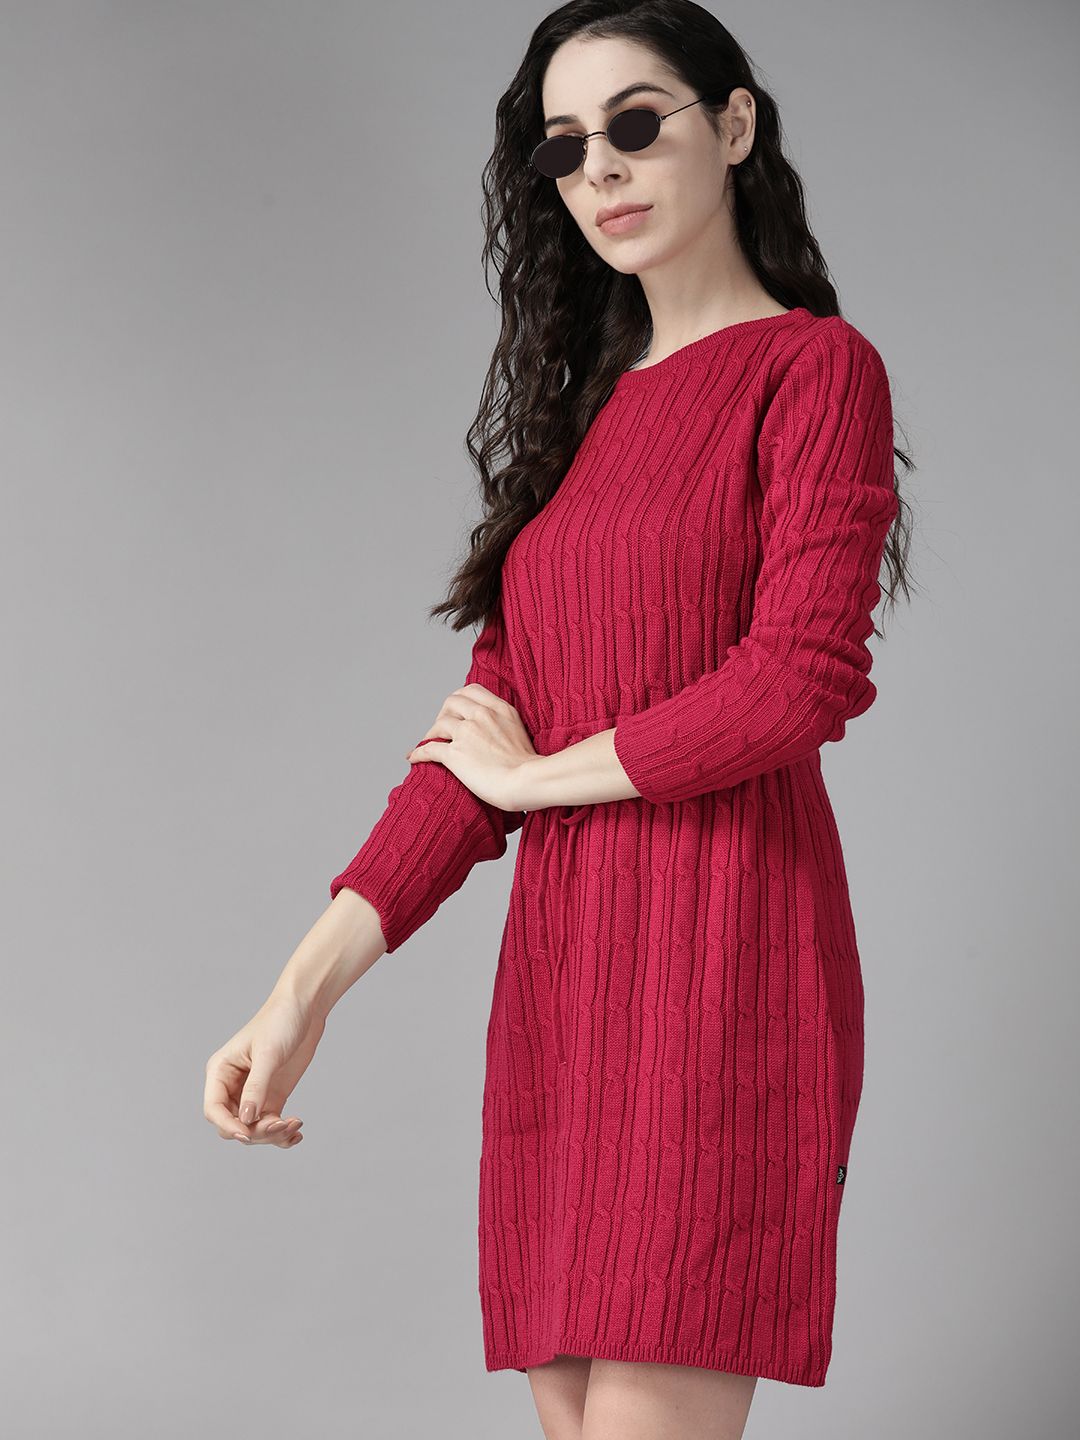 The Roadster Lifestyle Co. Women Red Cable Knit Acrylic Sweater Dress Price in India